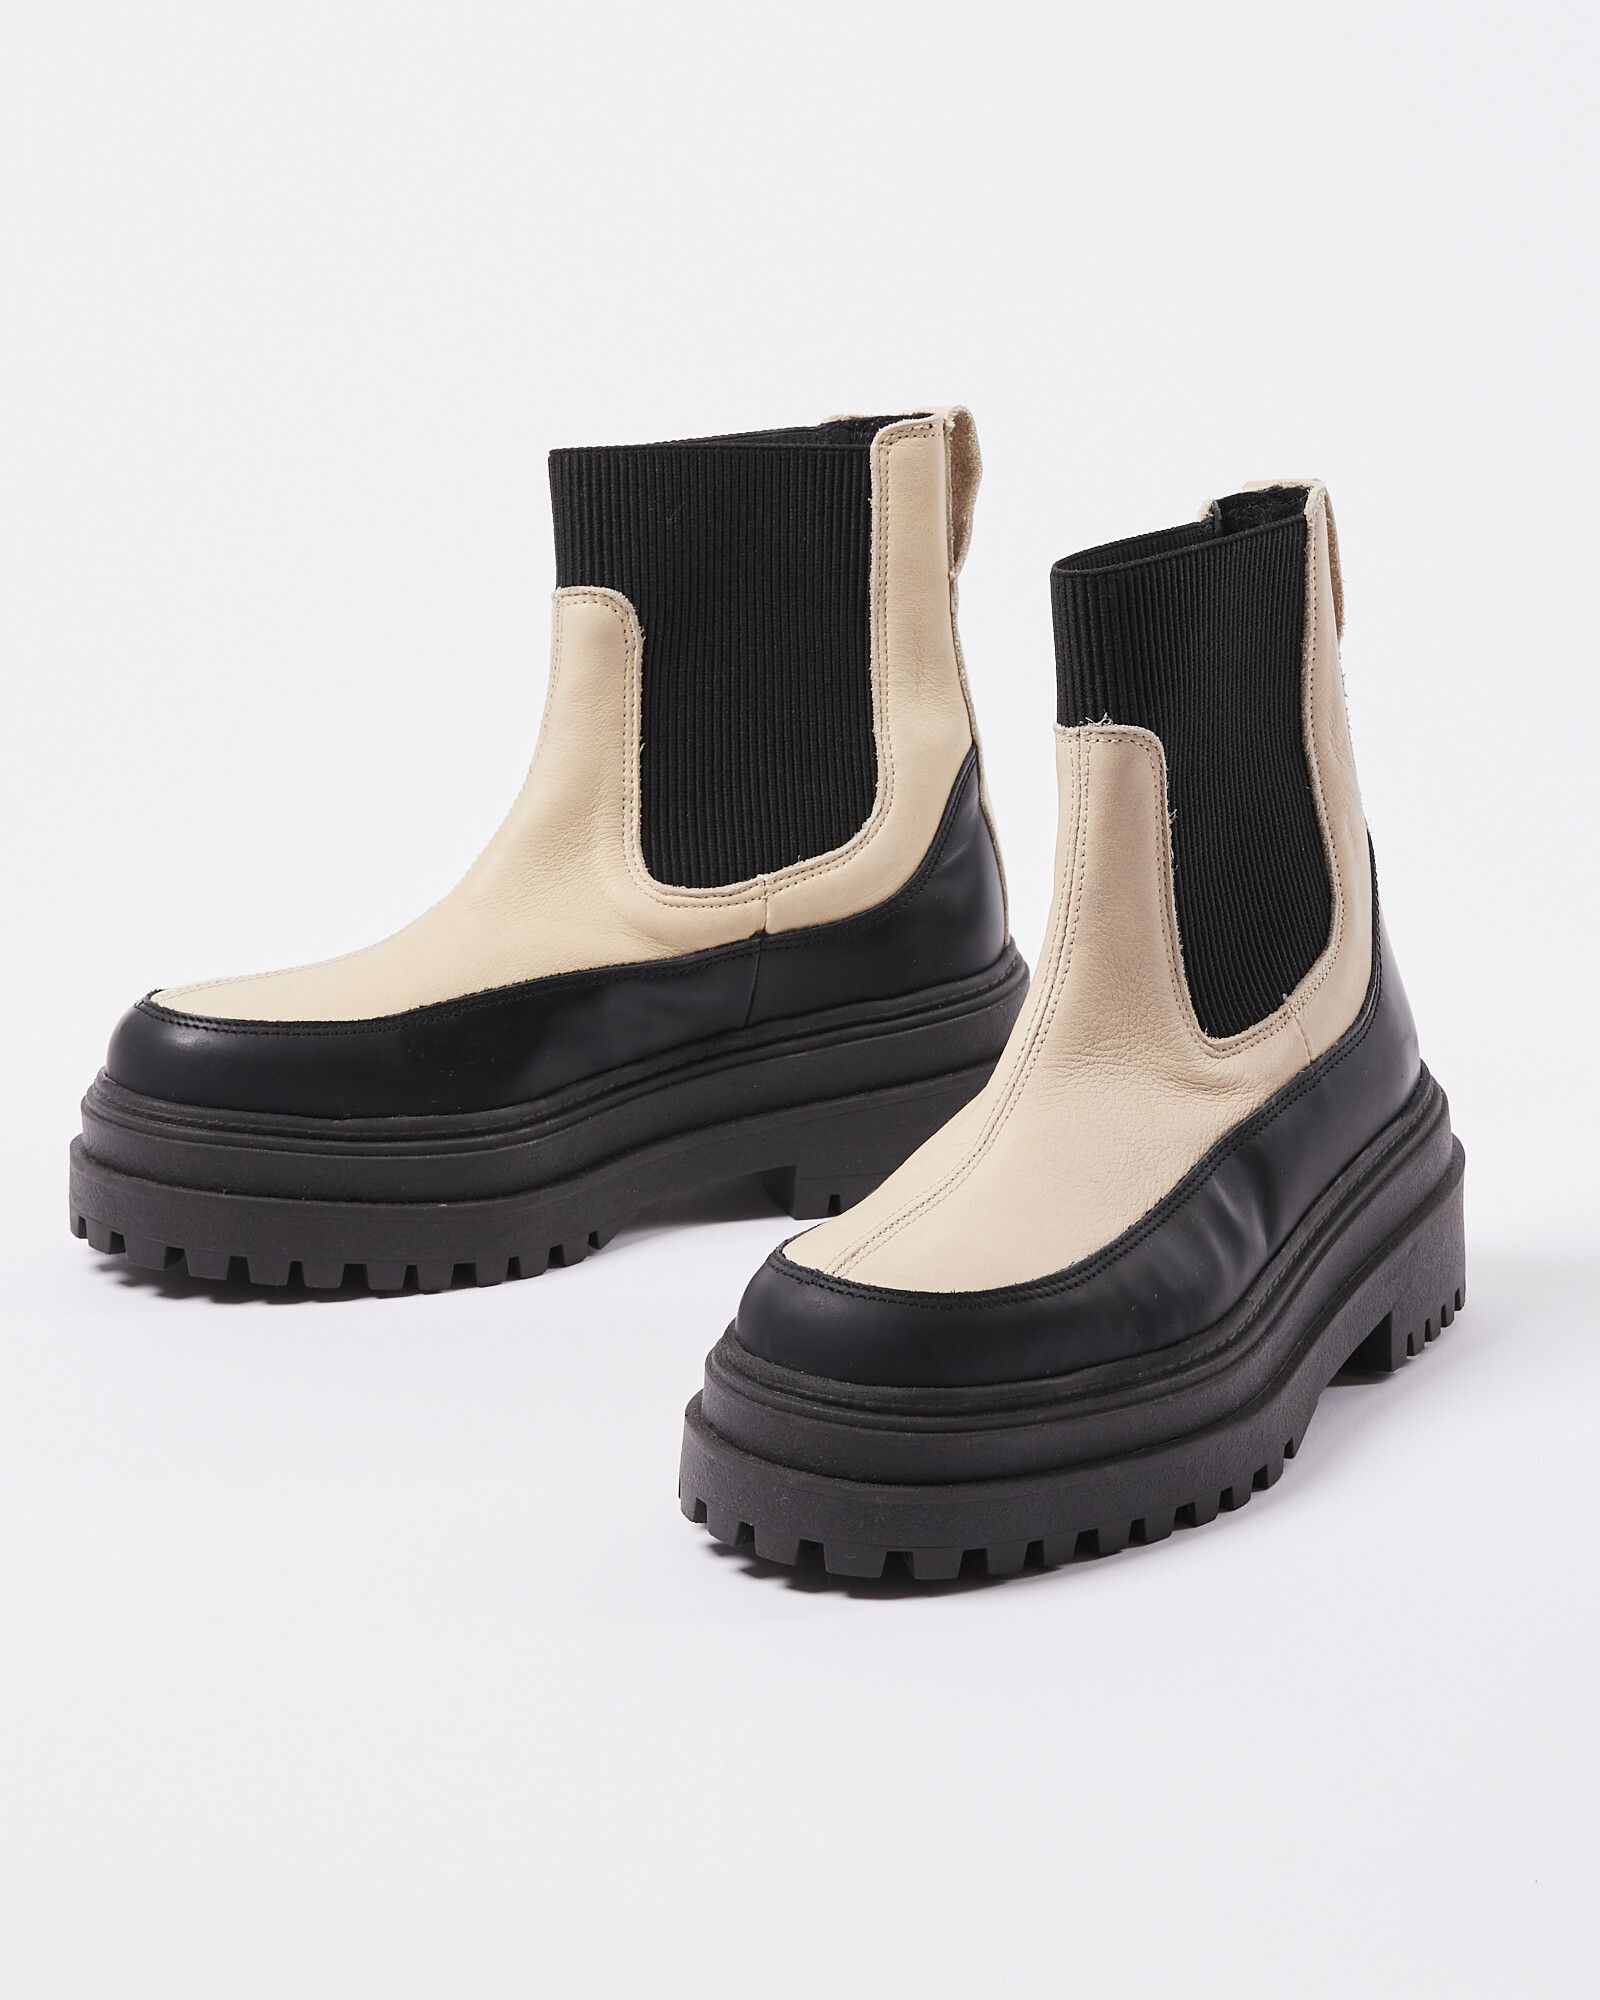 Selected Femme White & Black Leather Chunky Ankle Boots | Oliver Bonas